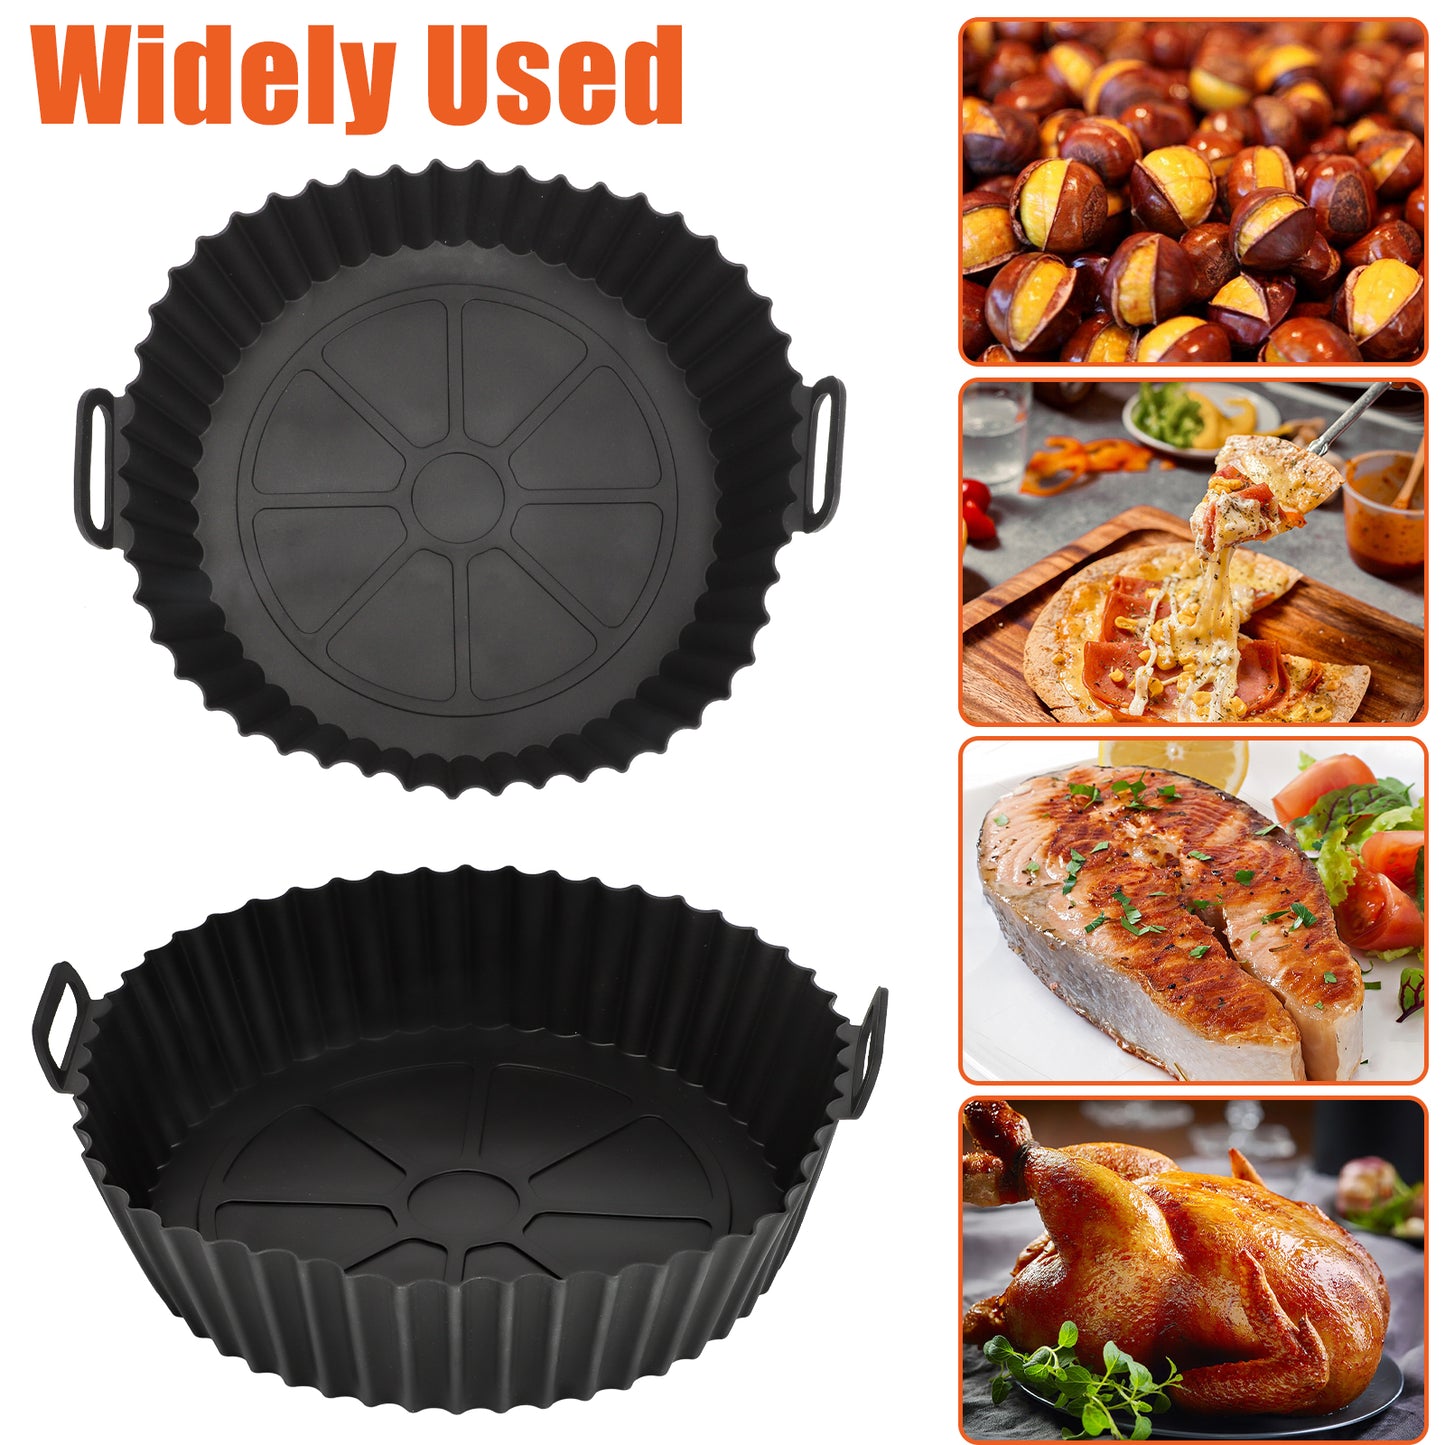 2Pcs Silicone Air Fryer Liners Pot - Reusable Non-Stick Air Fryer Silicone Basket Bowl,food-grade Silicone Baking Tray Pots for 5.3QT Air Fryer,Oven Accessories (Black)